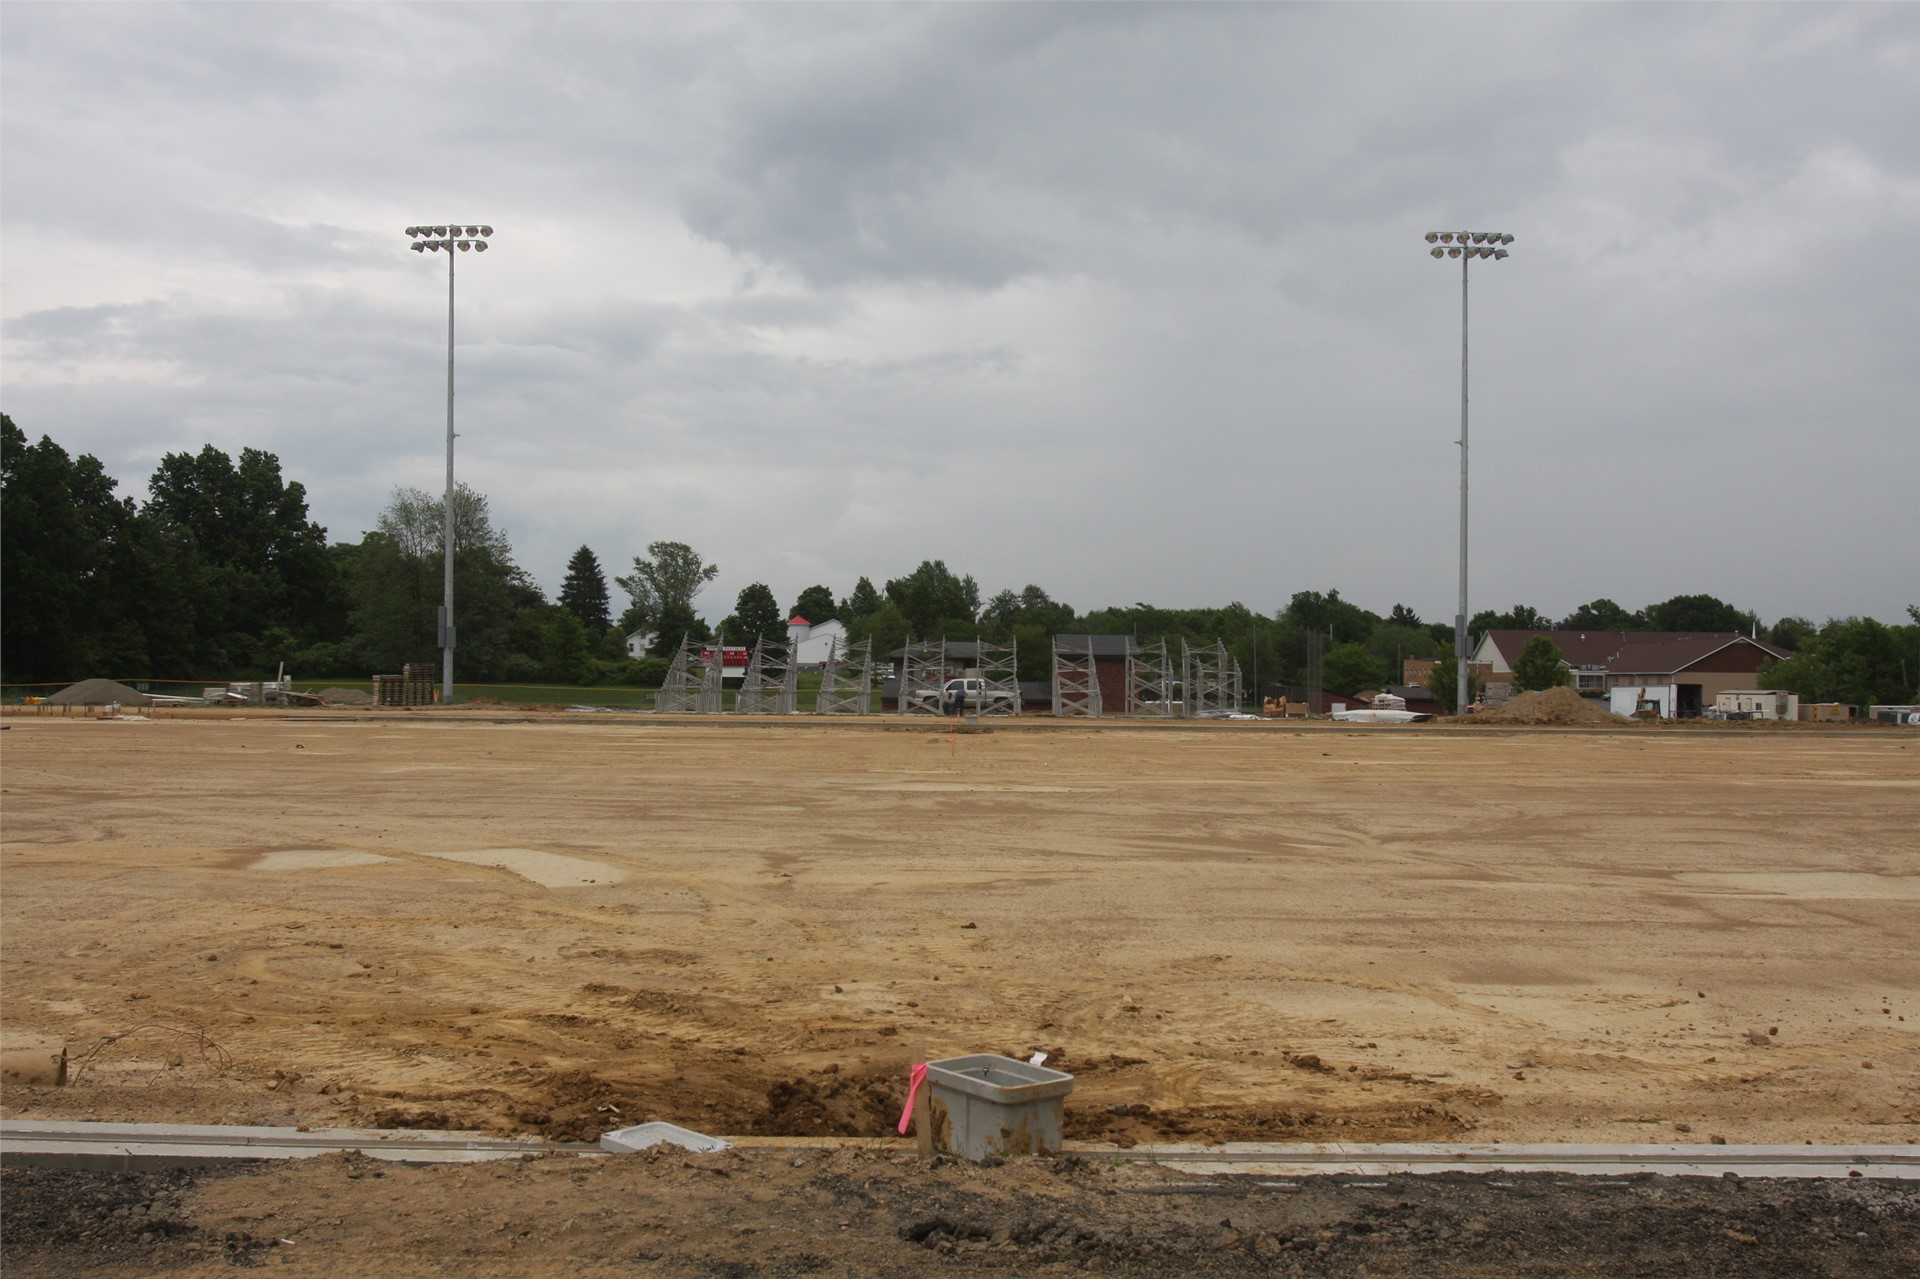 Start of the visitor stands, photo taken at 50 yard line from home side